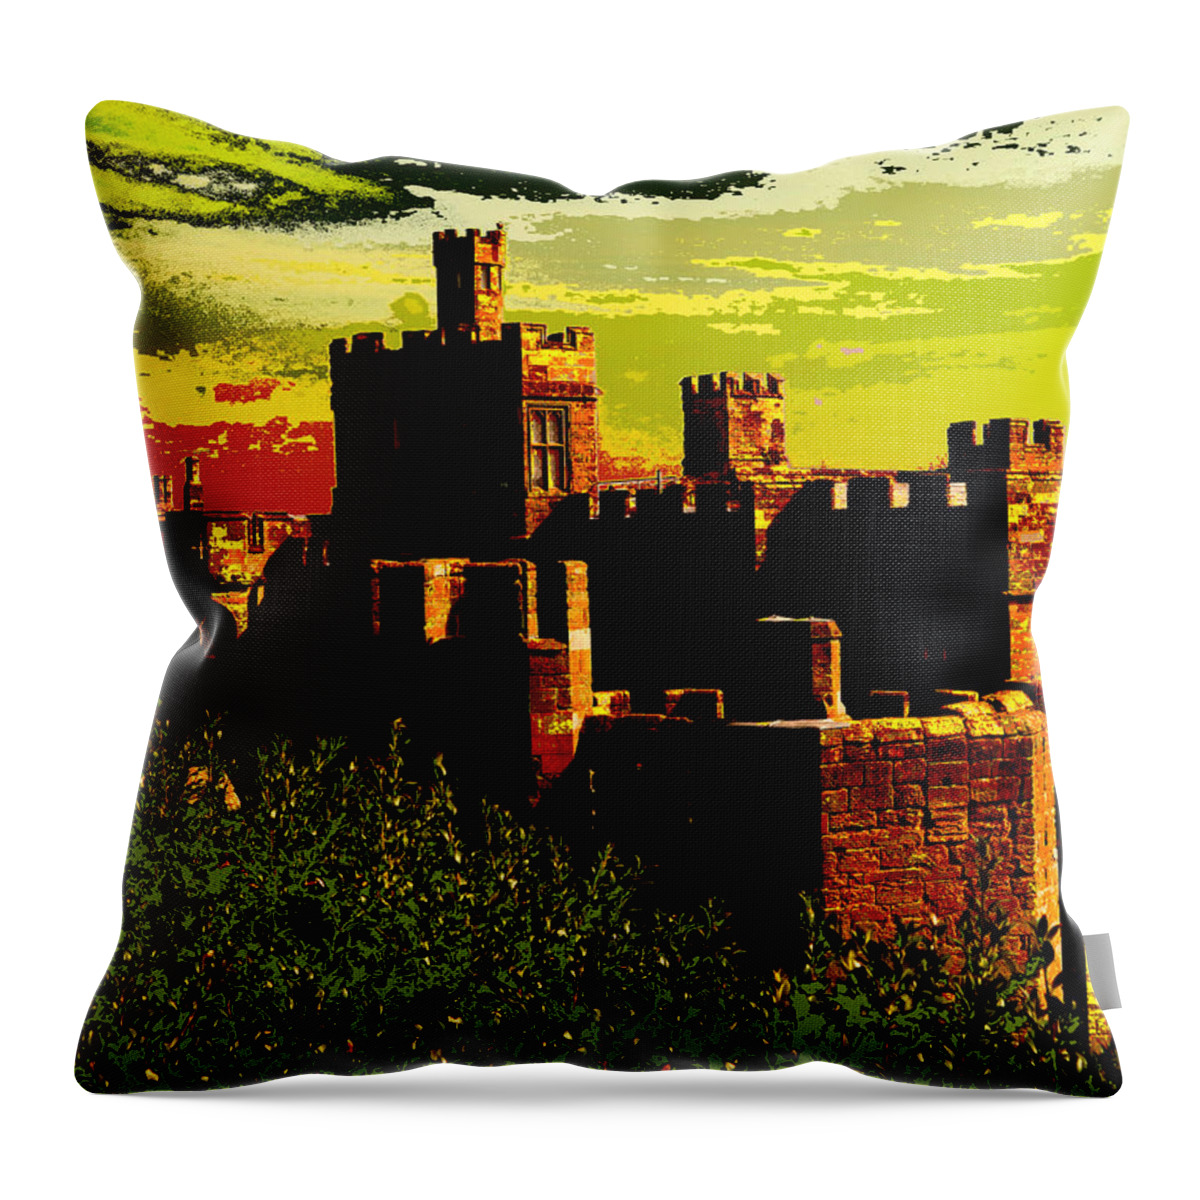  Throw Pillow featuring the digital art 0019 by Adrian Maggio